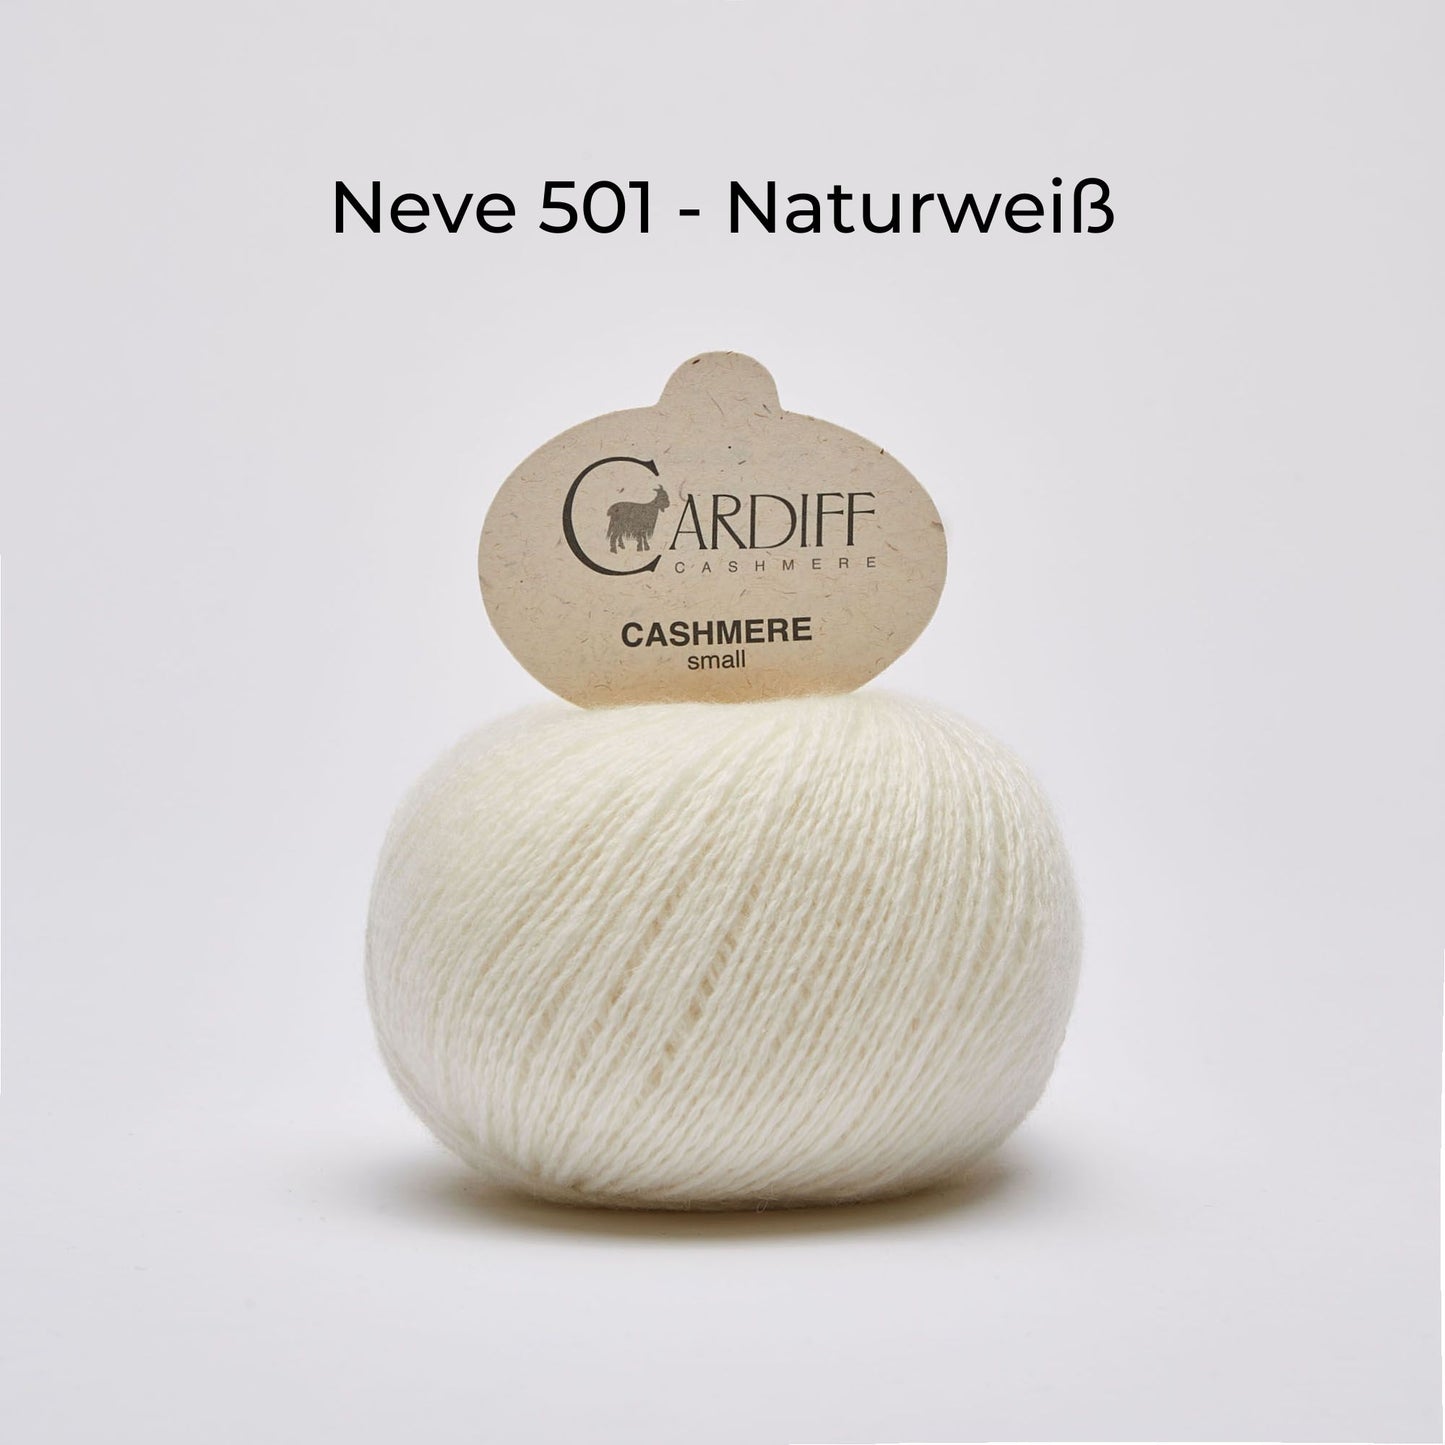 Cashmere wool - Cardiff Cashmere Small 4/28 - NS 2.5-3.5 mm